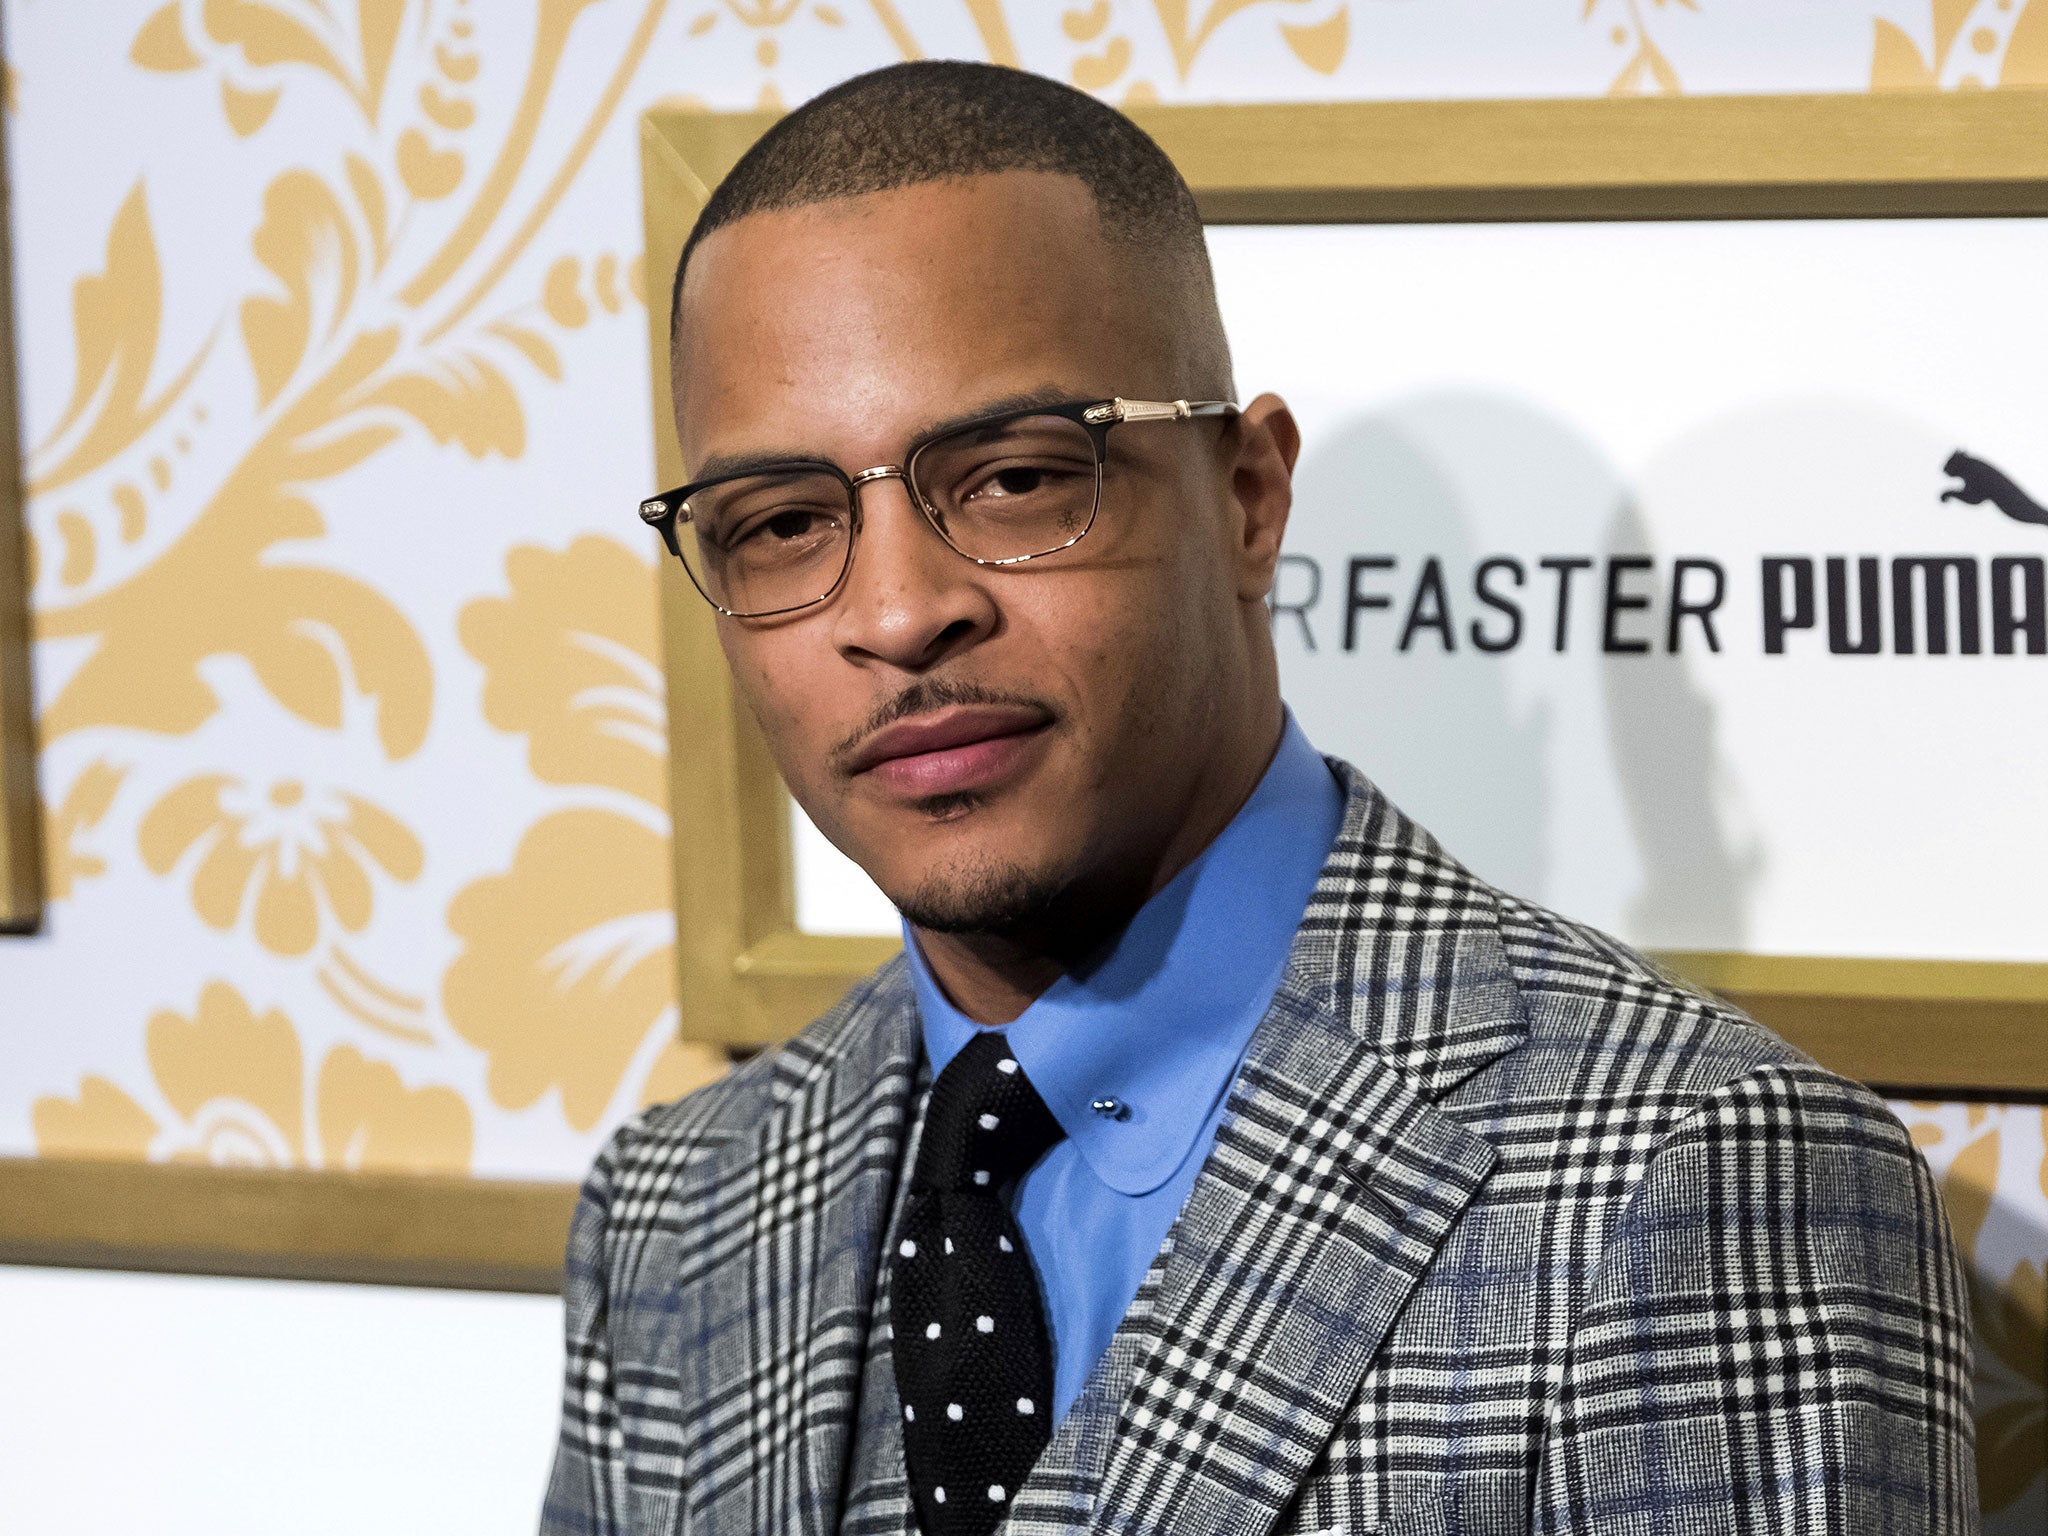 TI, real name is Clifford Harris, has been arrested on disorderly conduct and public drunkenness charges